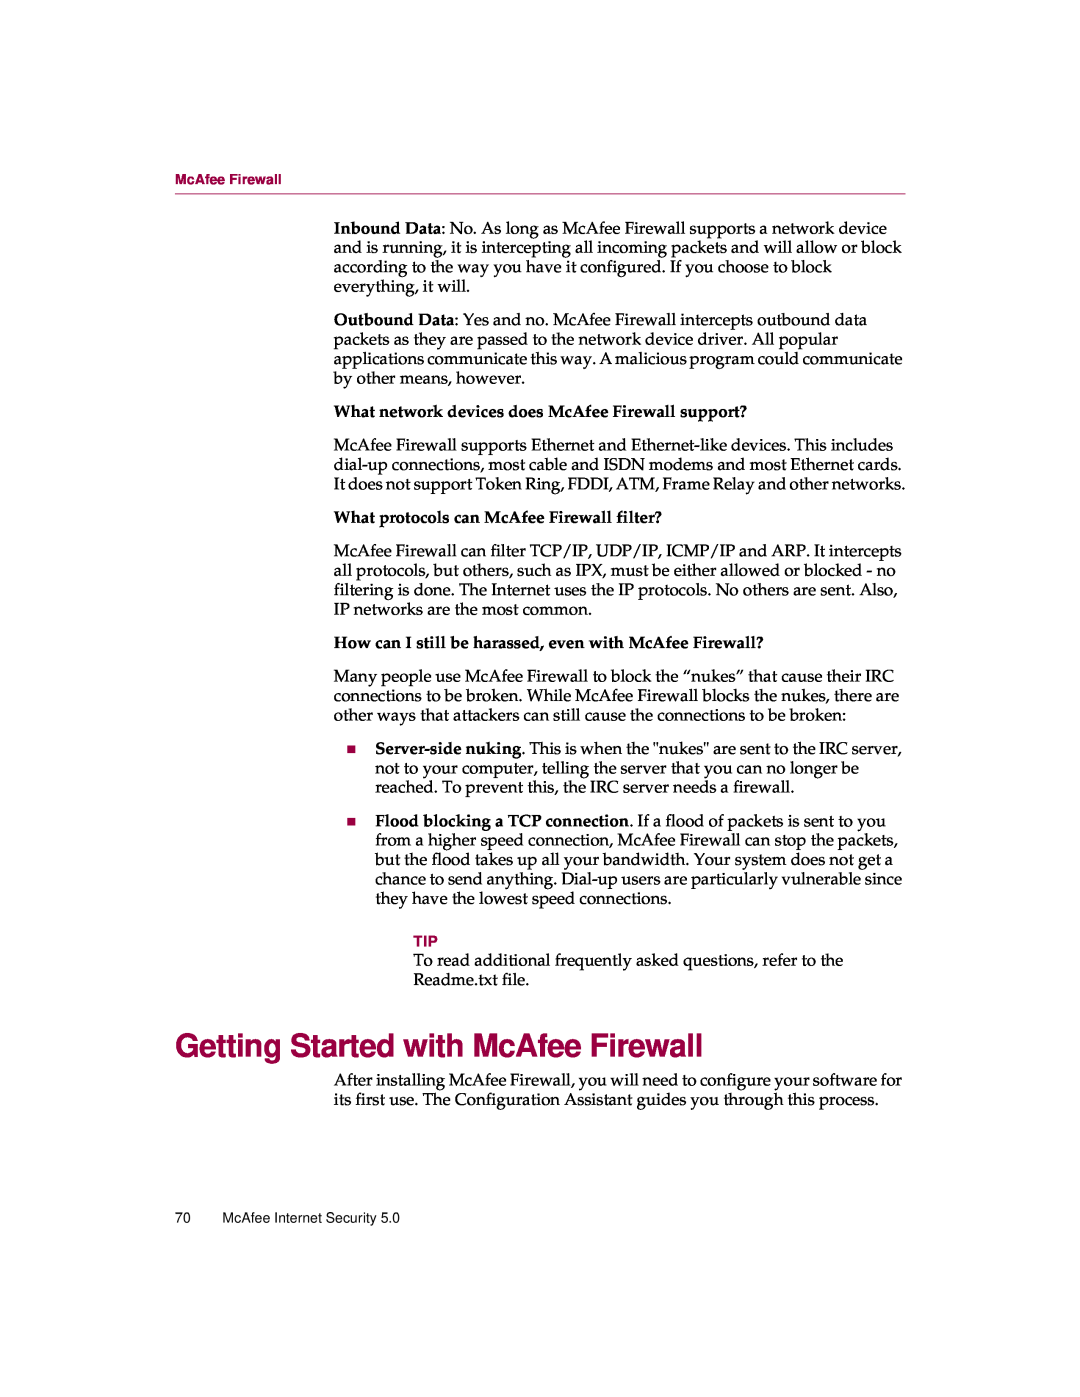 McAfee 5 manual Getting Started with McAfee Firewall, What protocols can McAfee Firewall filter? 